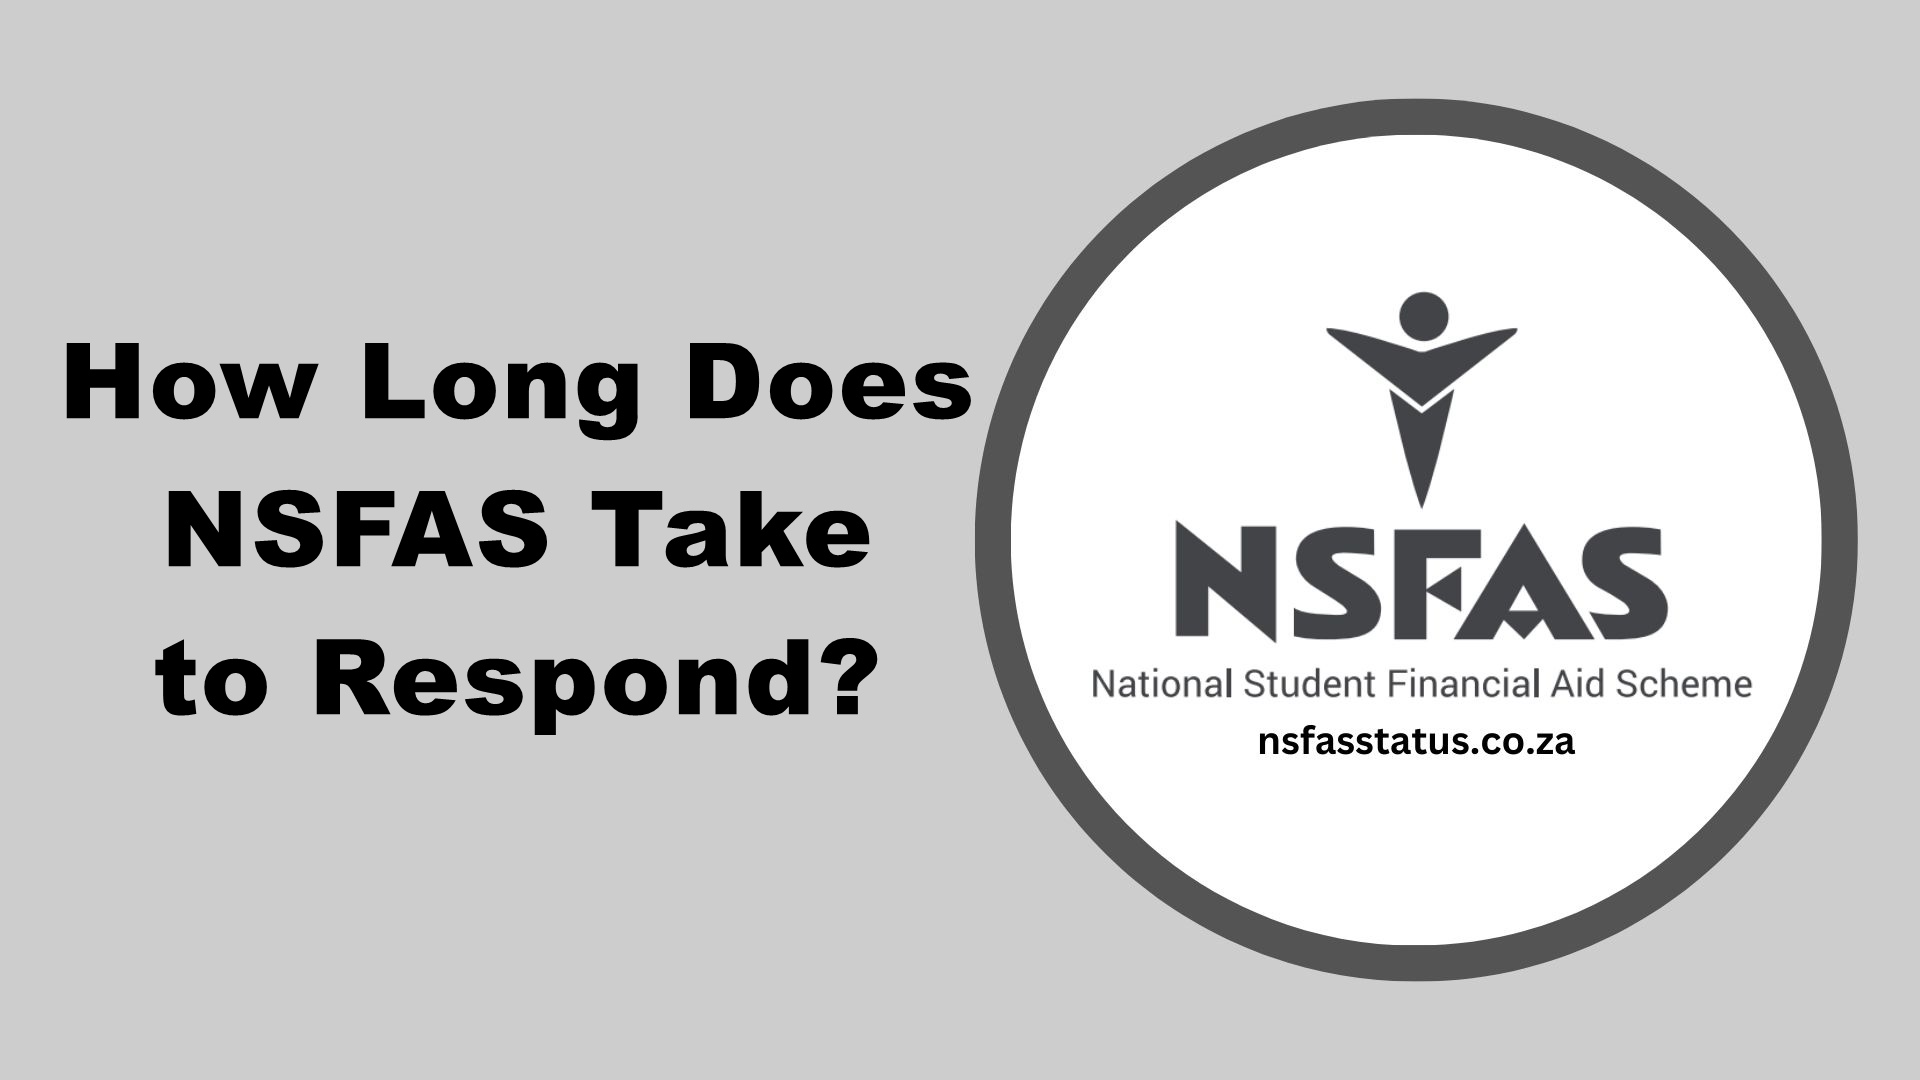 How Long Does NSFAS Take to Respond